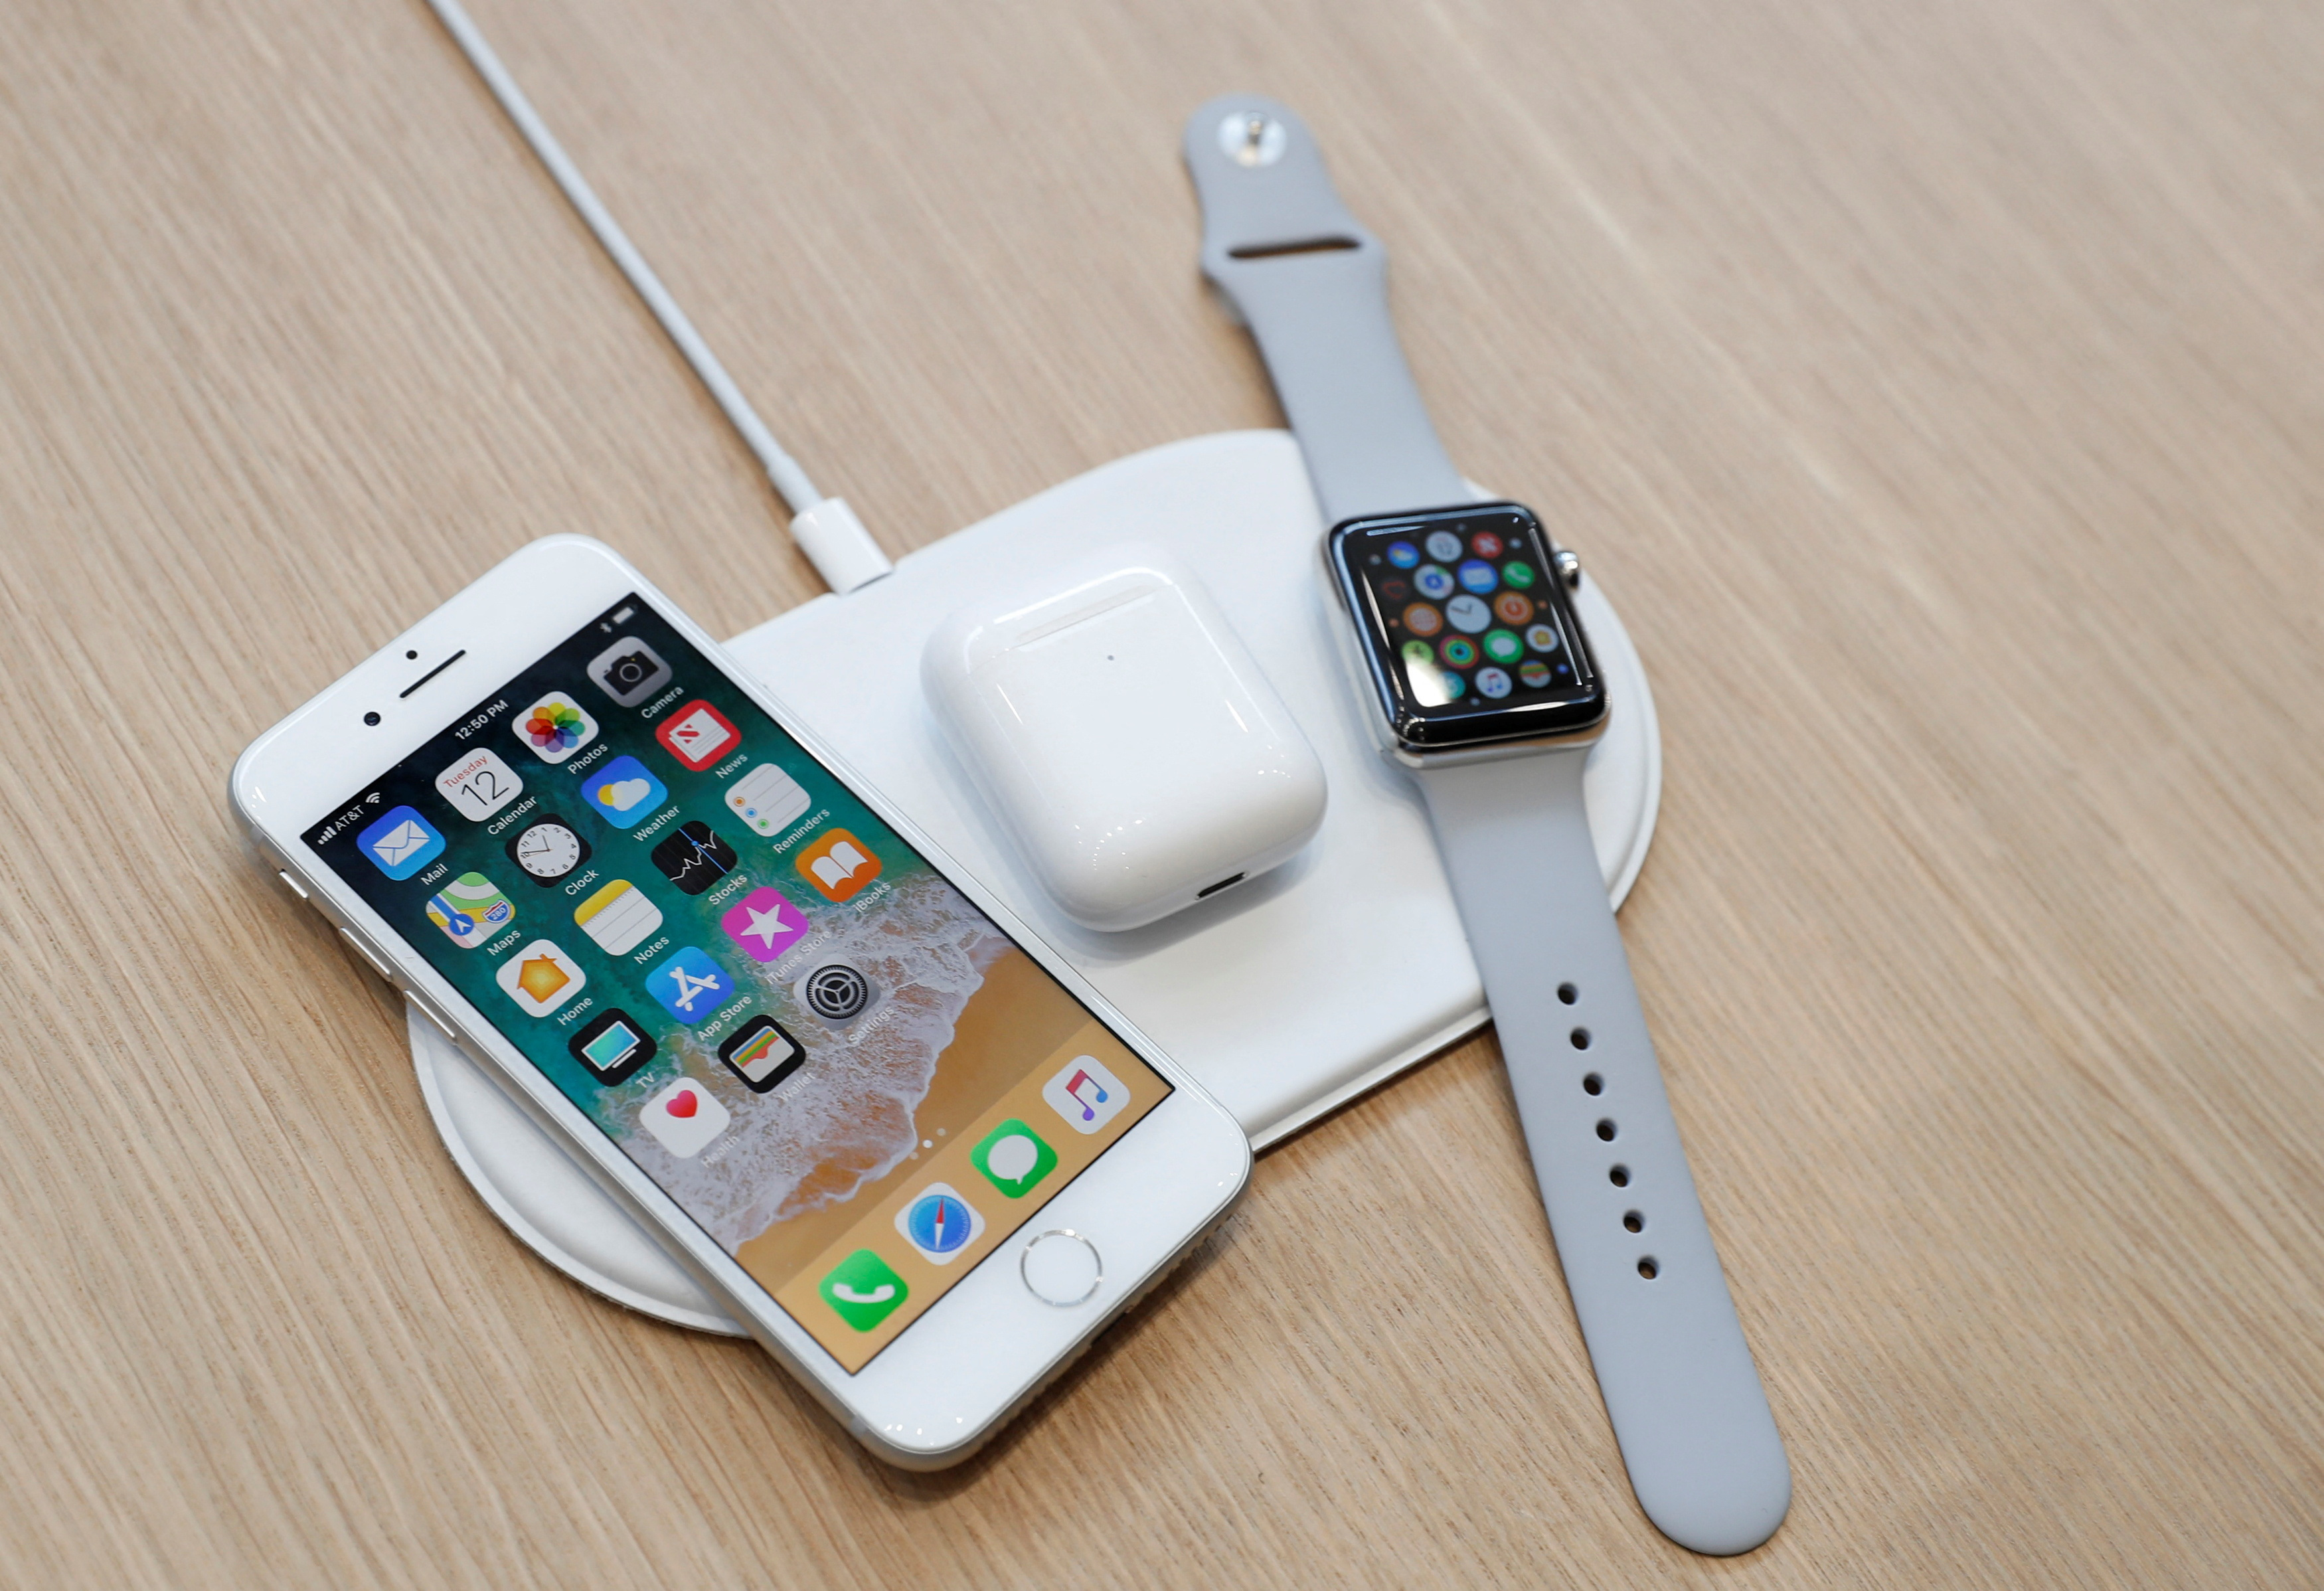 An AirPower wireless charger is displayed during a launch event in Cupertino